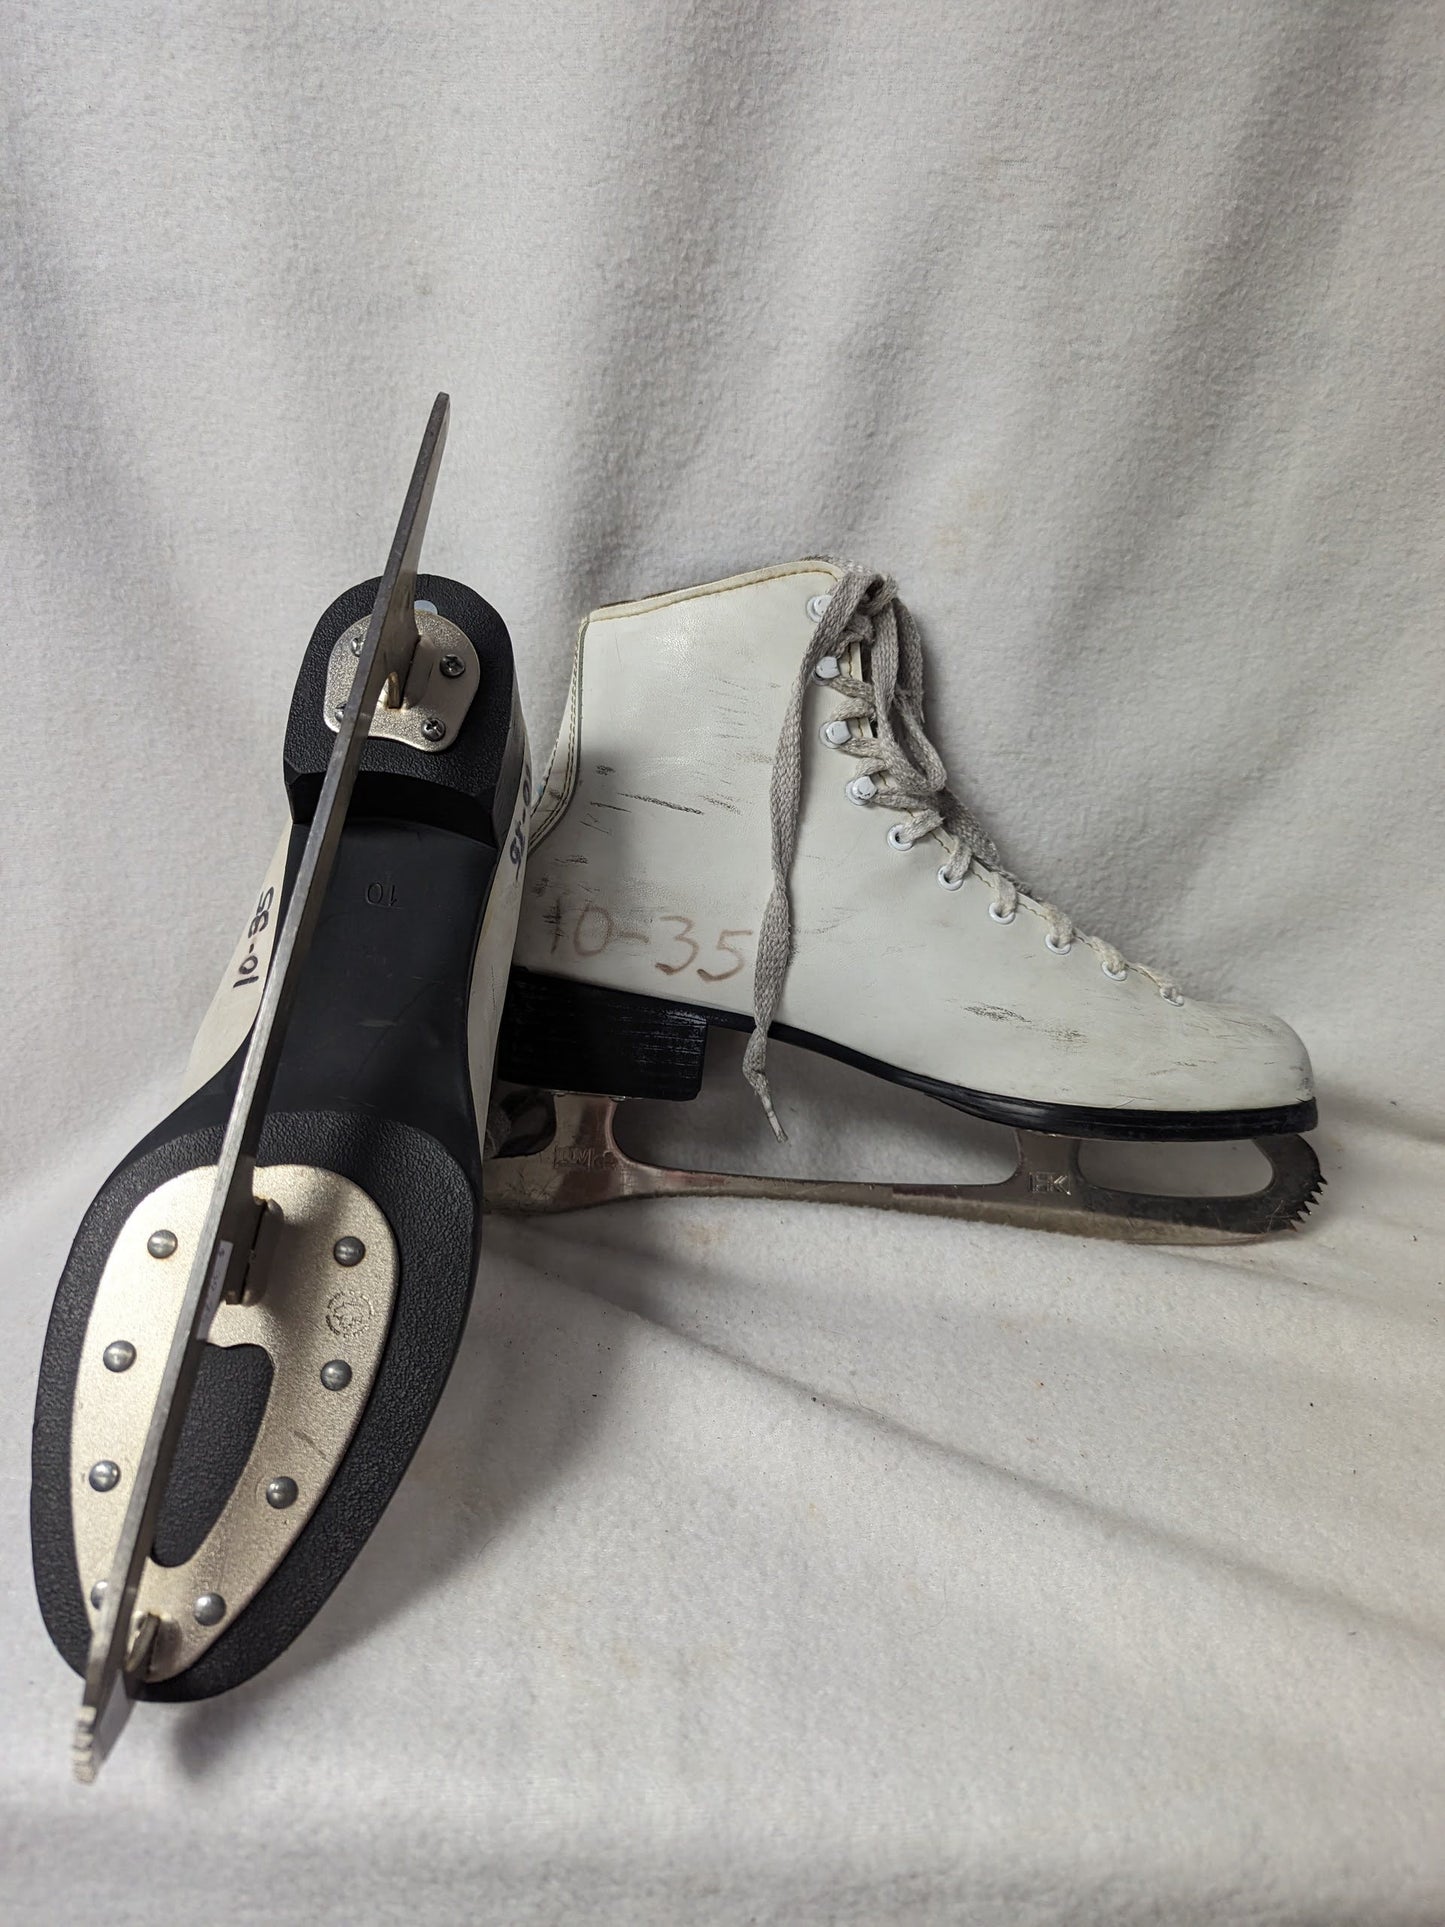 Lake Placid Figure Ice Skates Size 10 Color White Condition Used